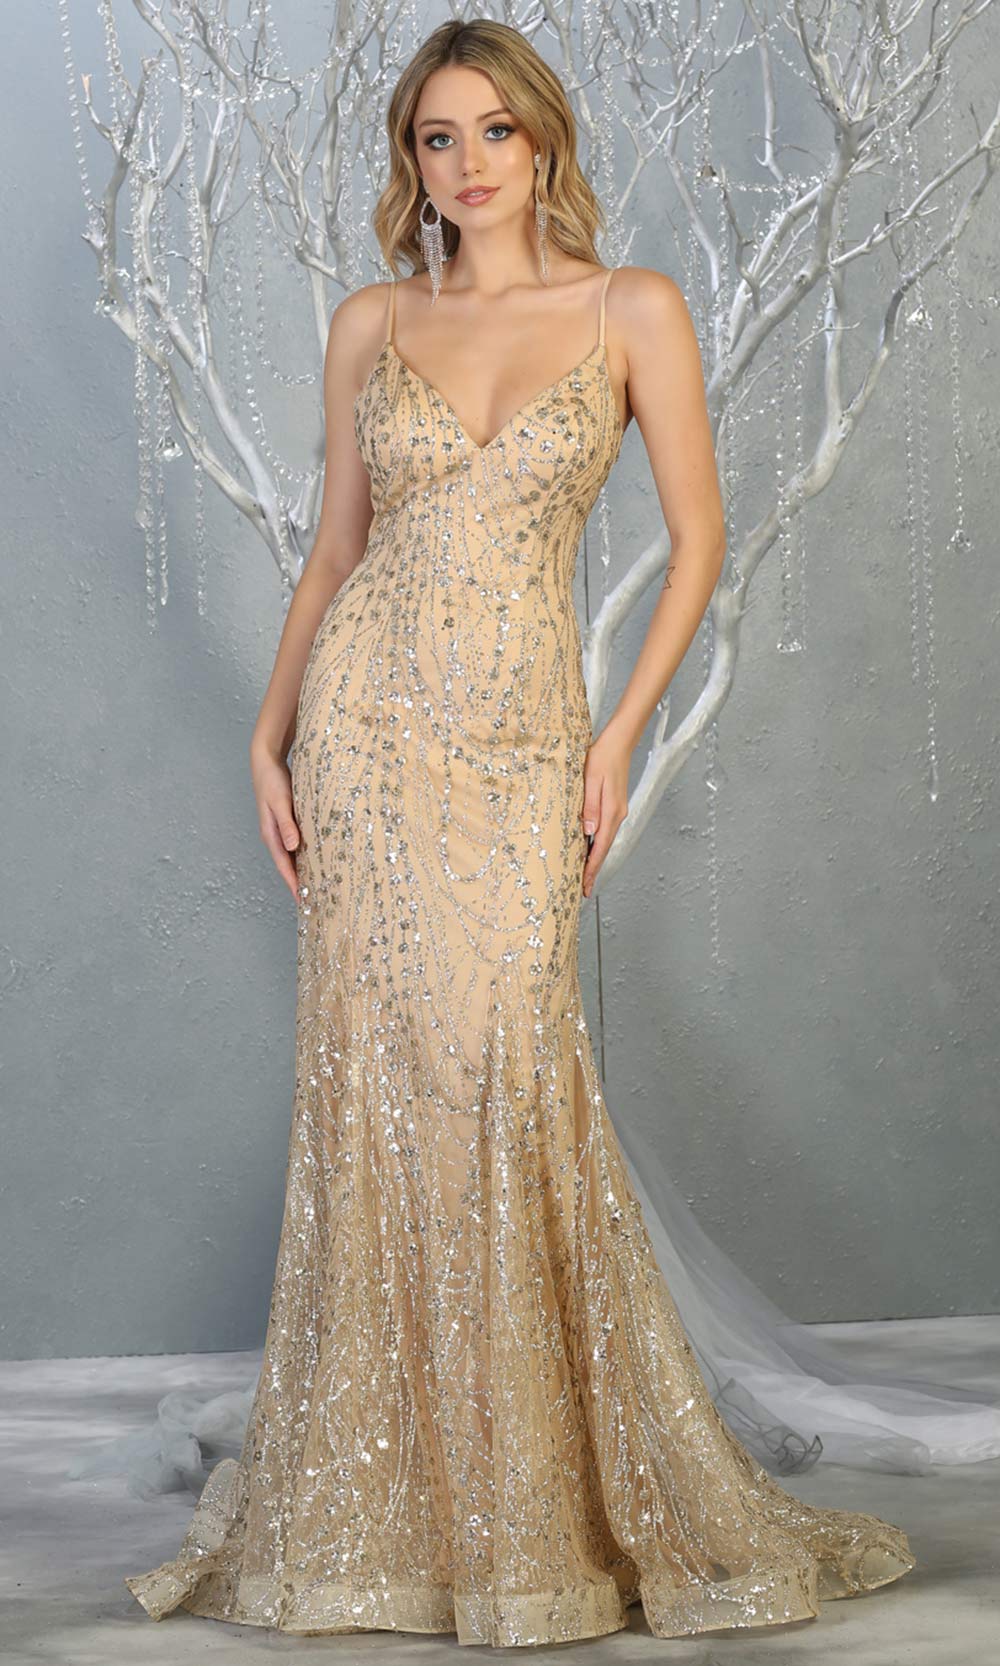 Mayqueen RQ7814 long gold v neck sexy fitted sequin dress w/straps. Full length light gold gown is perfect for  enagagement/e-shoot dress, formal wedding guest, indowestern gown, evening party dress, prom, bridesmaid. Plus sizes avail.jpg